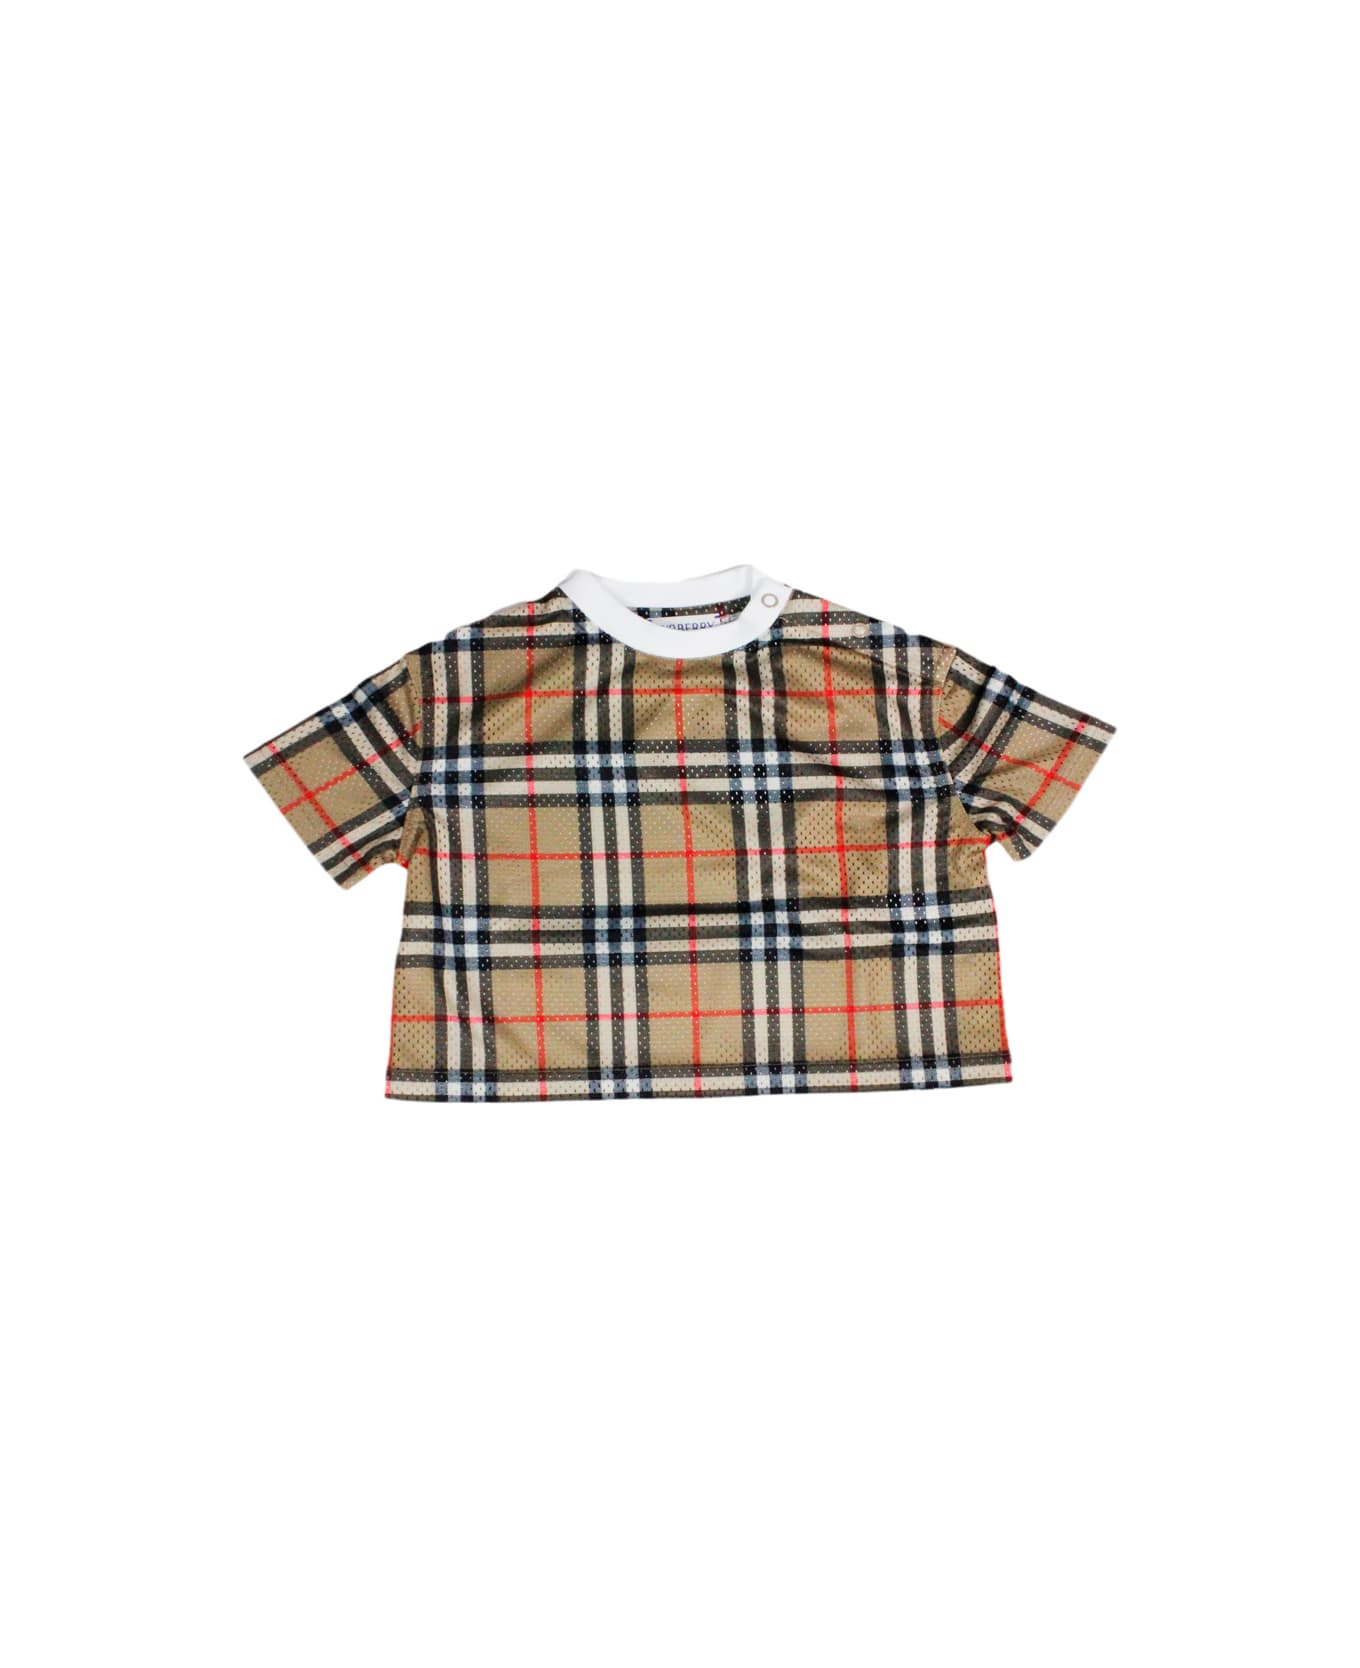 Burberry Crew-neck, Short-sleeved T-shirt In Perforated Fabric With Check Pattern And Small Buttons On The Shoulder. - Beige Tシャツ＆ポロシャツ